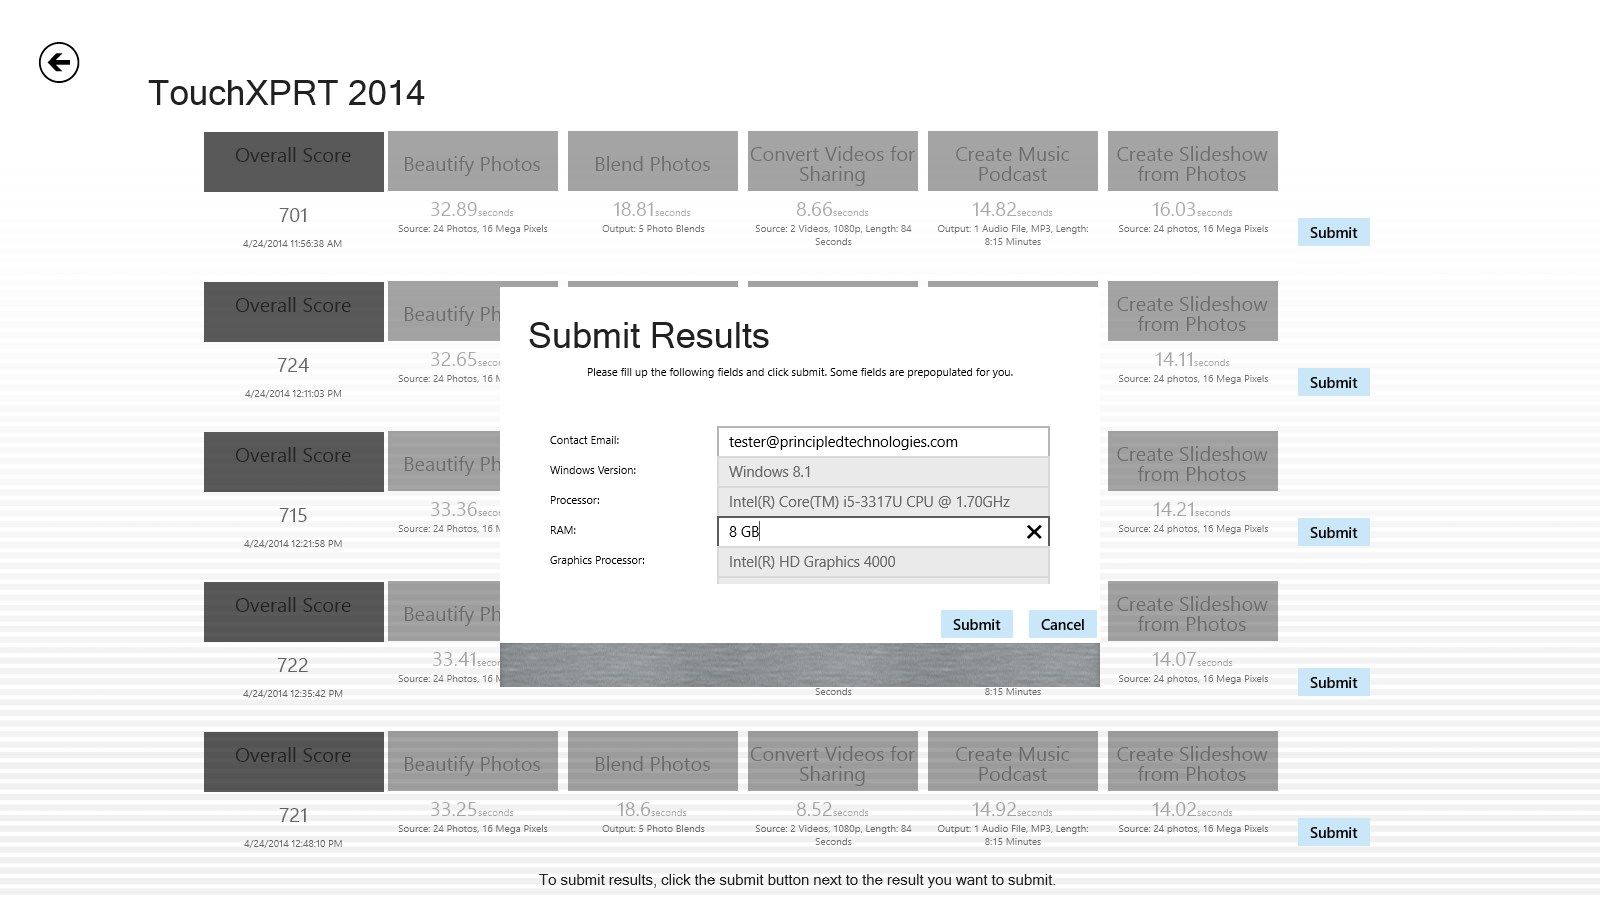 Submit results directly from the app.